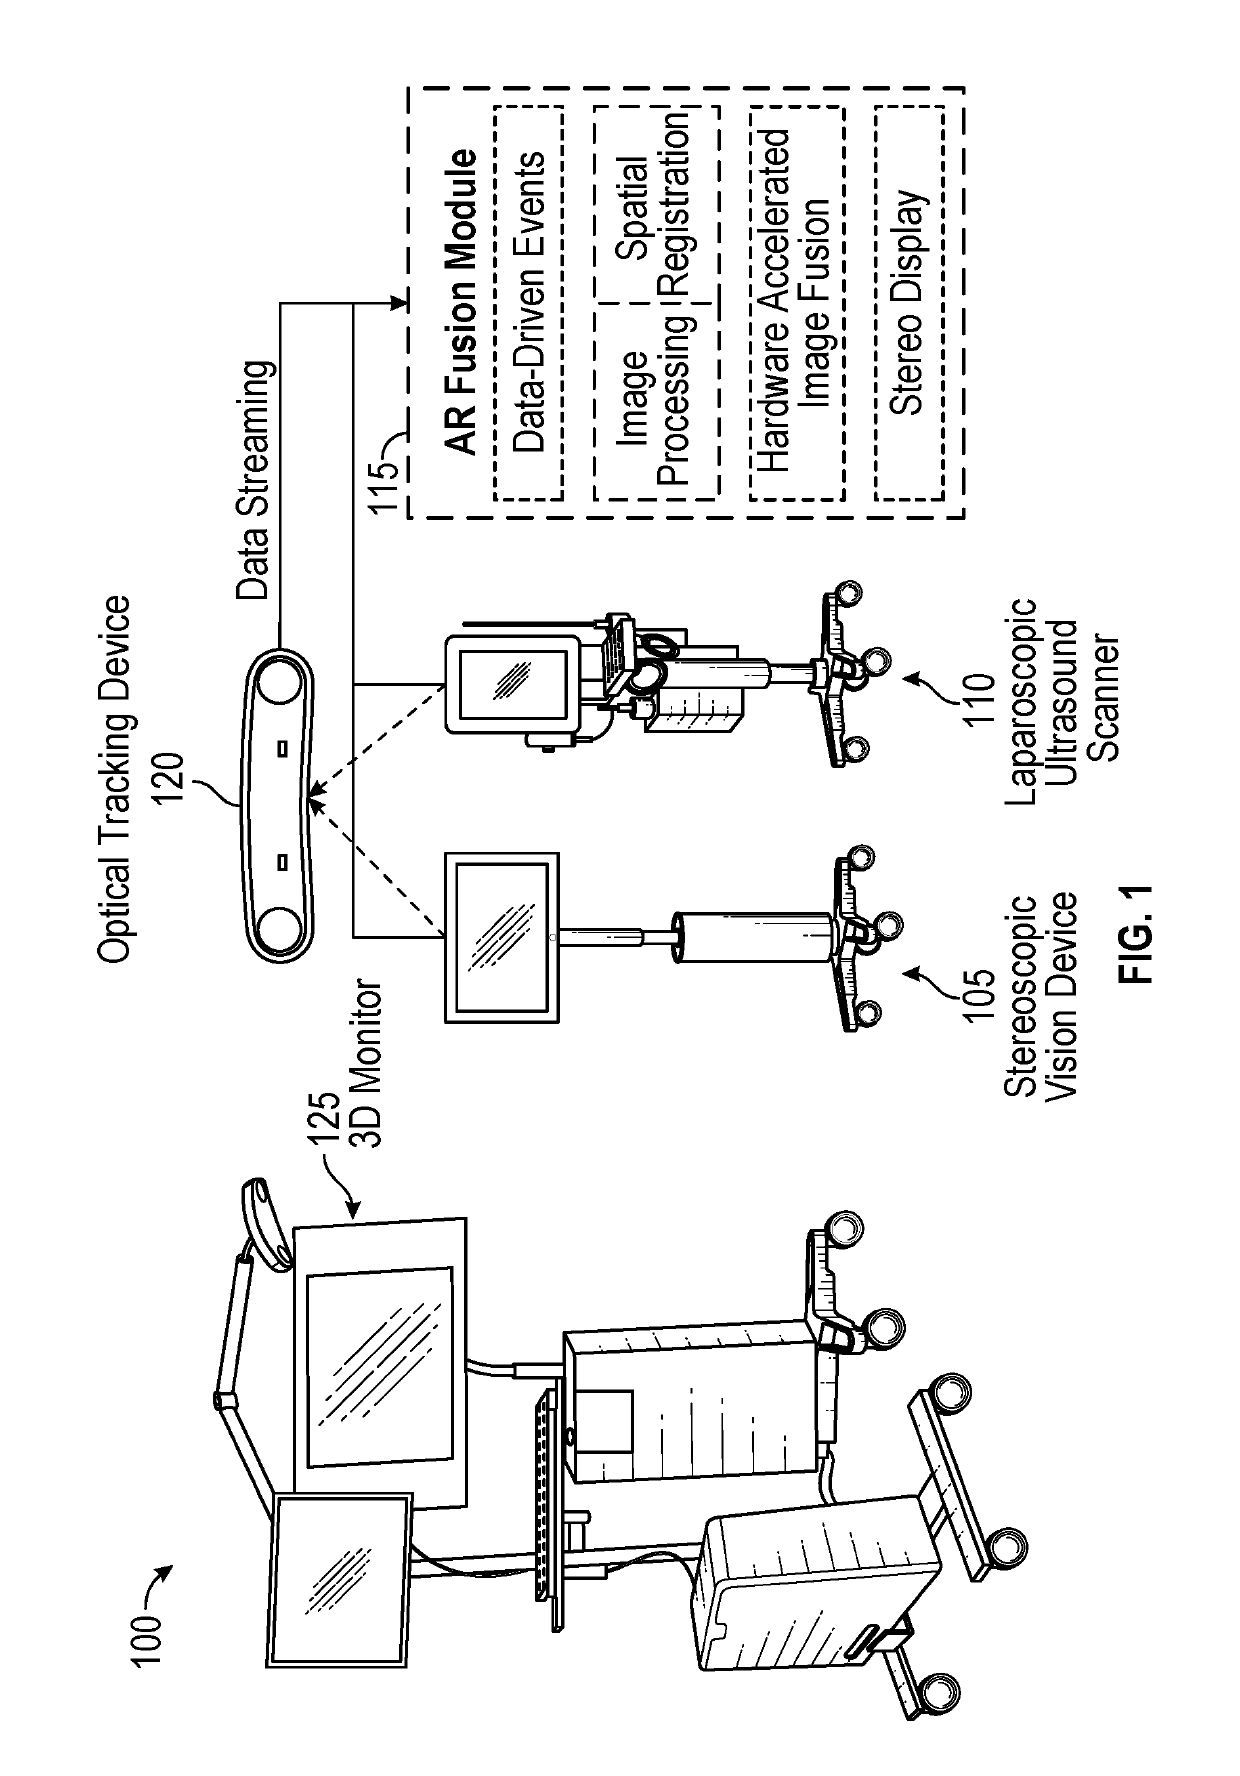 System for generating composite images for endoscopic surgery of moving and deformable anatomy